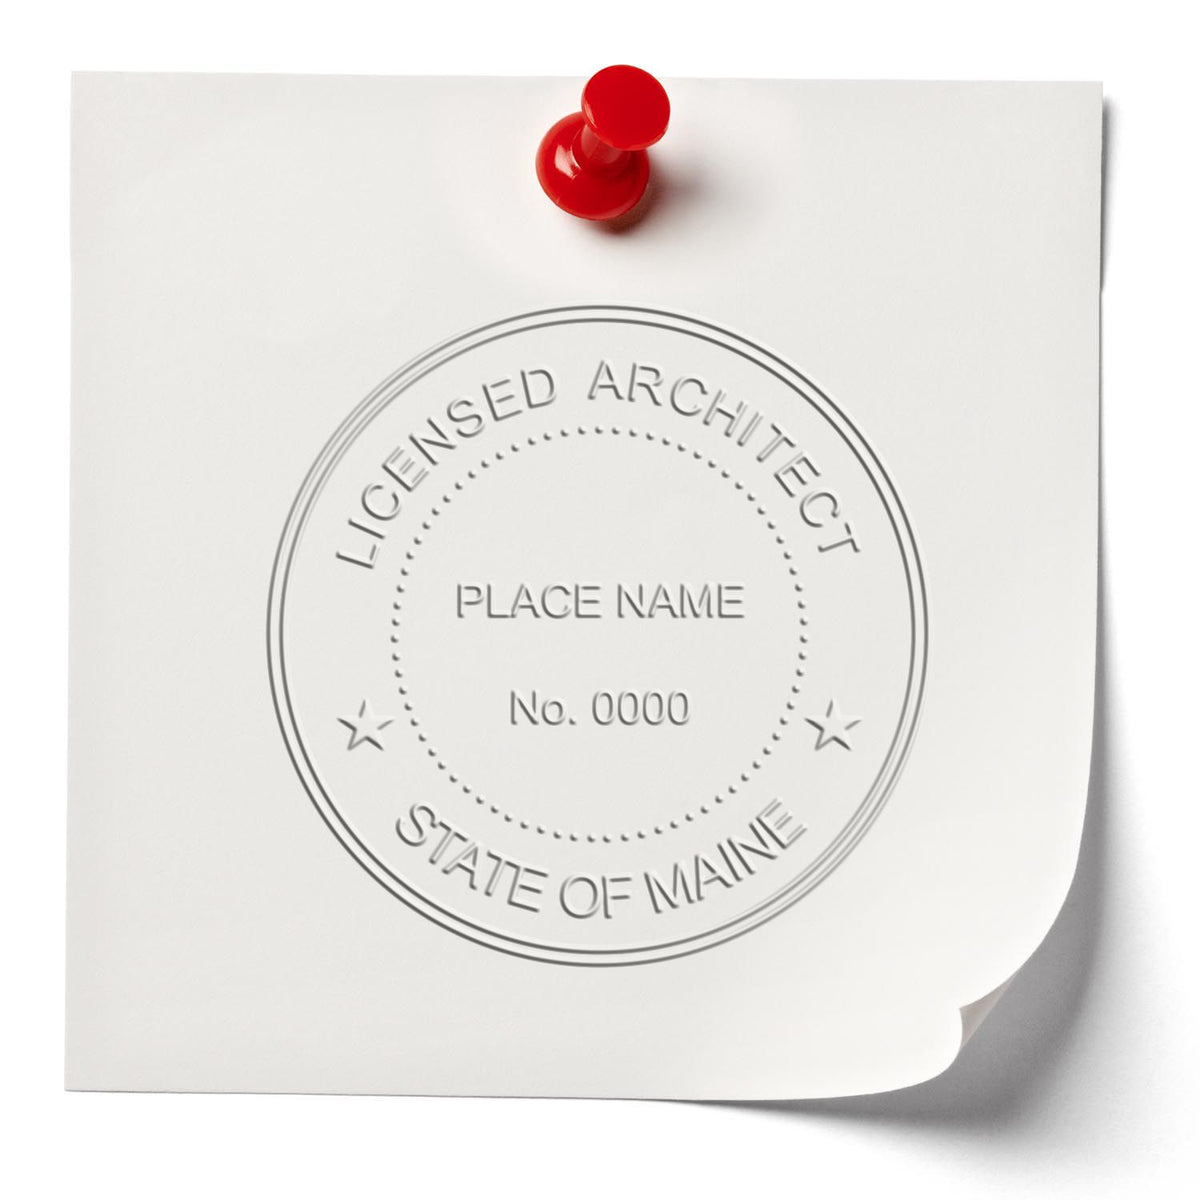 A photograph of the Hybrid Maine Architect Seal stamp impression reveals a vivid, professional image of the on paper.